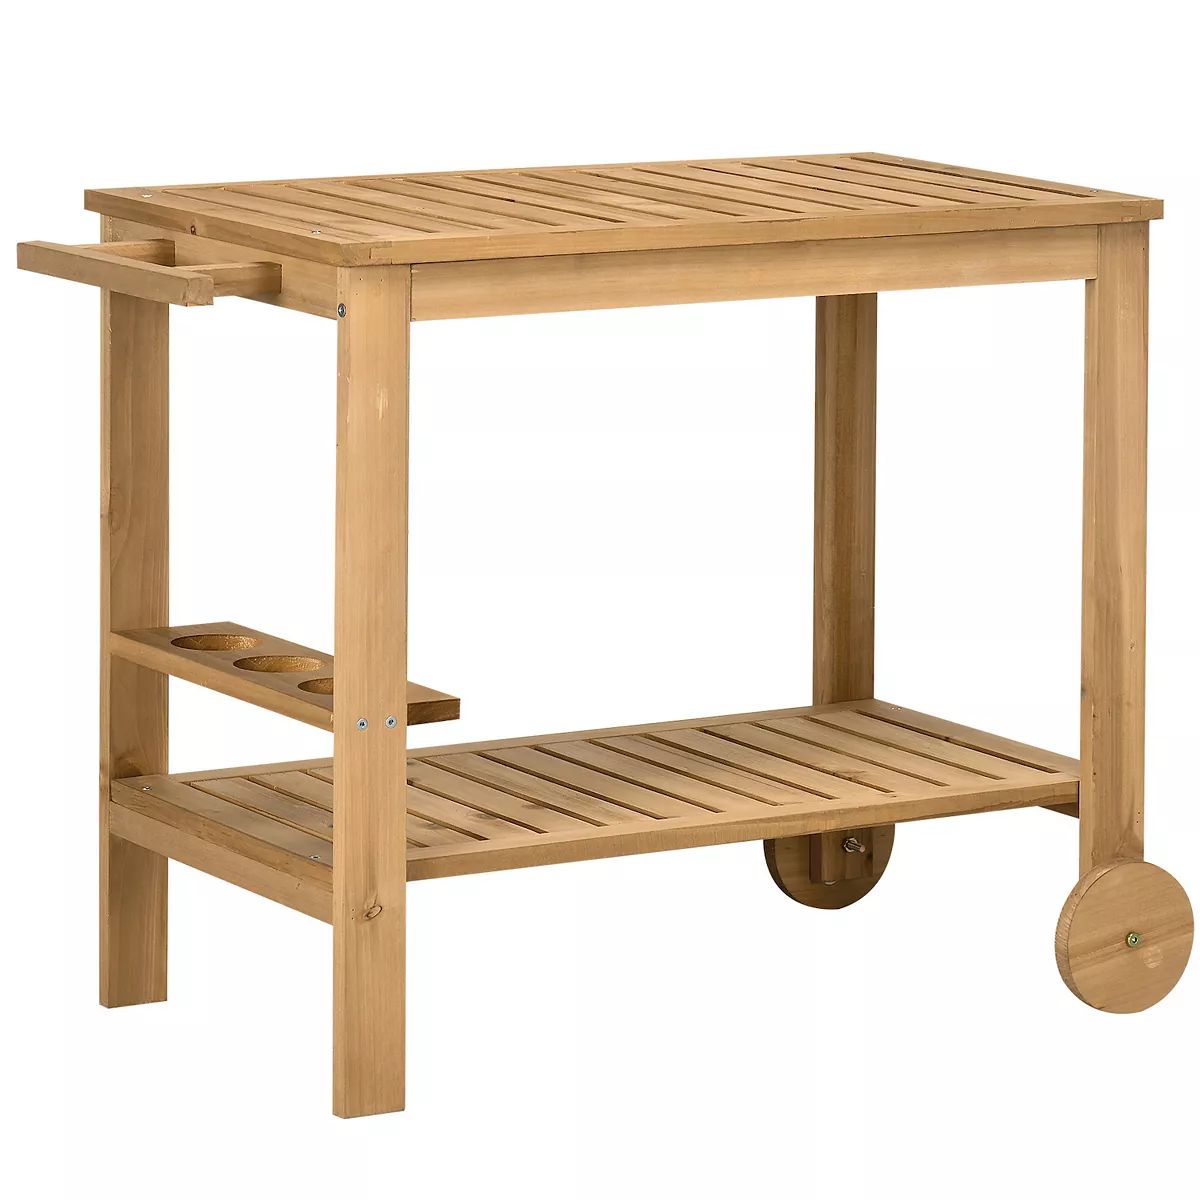 Outsunny Outdoor Wood Bar Cart Patio Serving Cart with Wine Holders, Natural | Kohl's